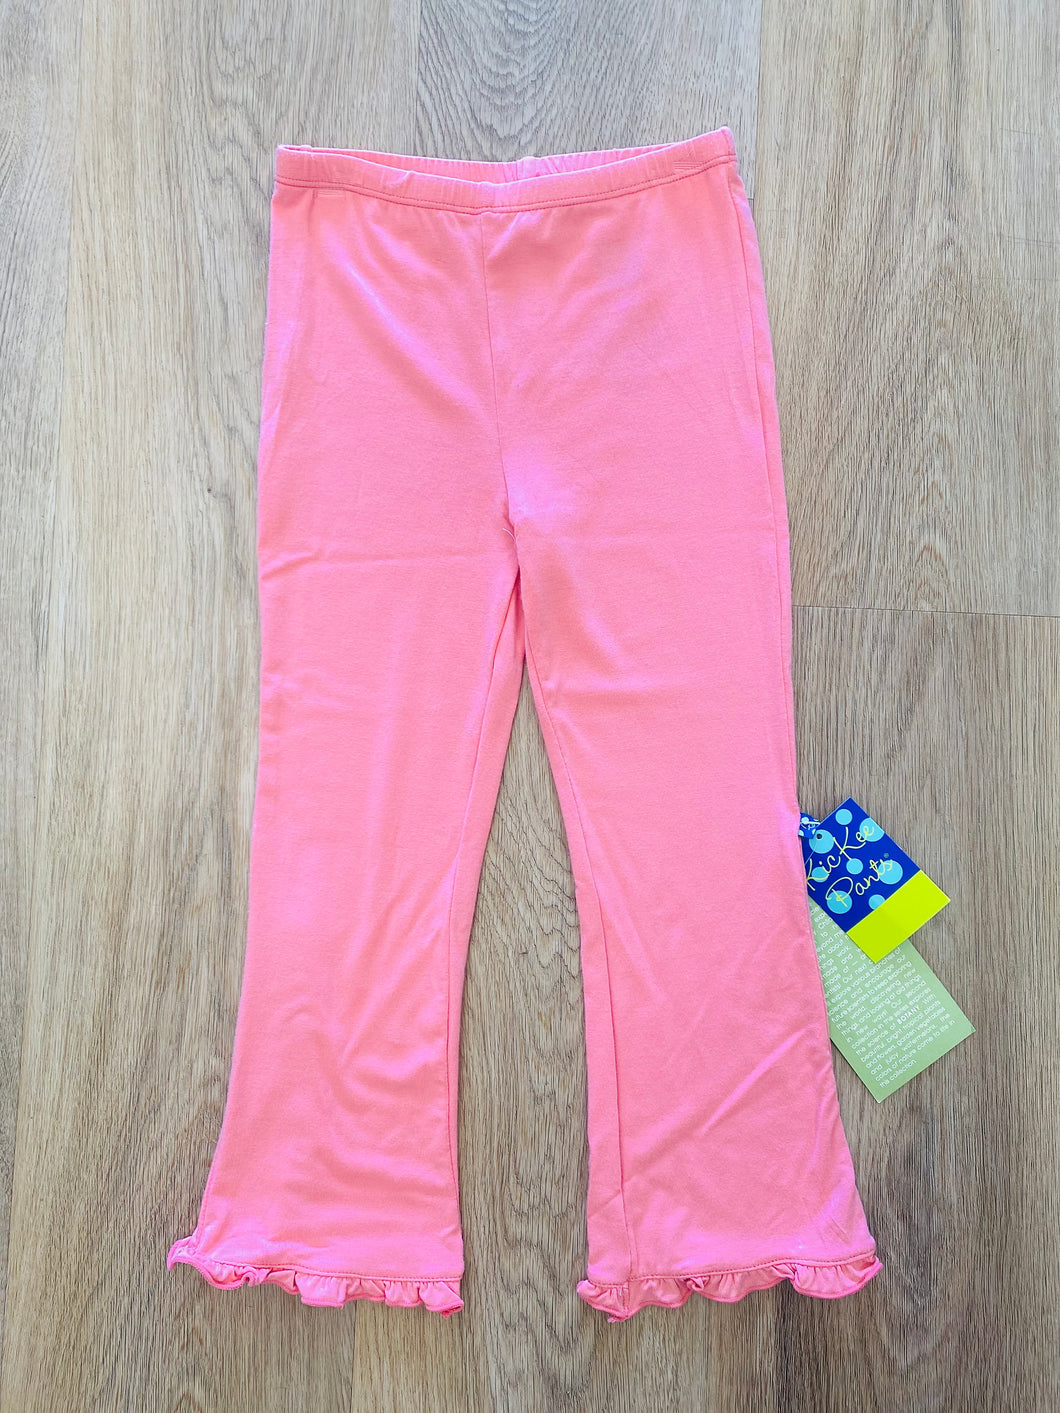 Ruffle Pant in Strawberry - 4T